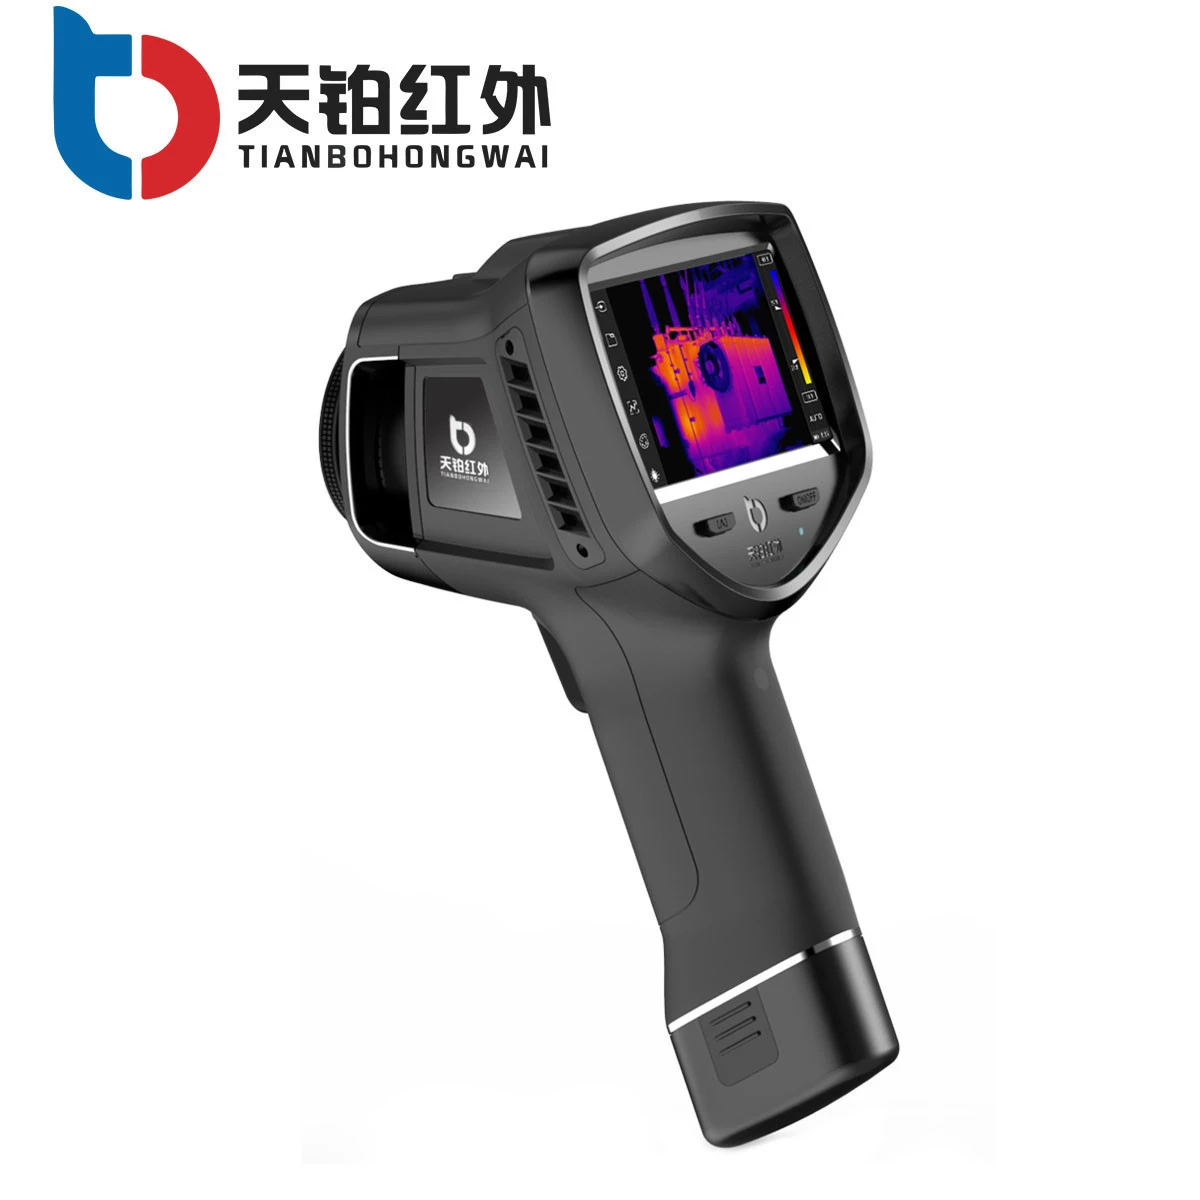 Tianbo Thermal Camera Manufacture Medical Infrared Camera to Detect Patients with A High Fever